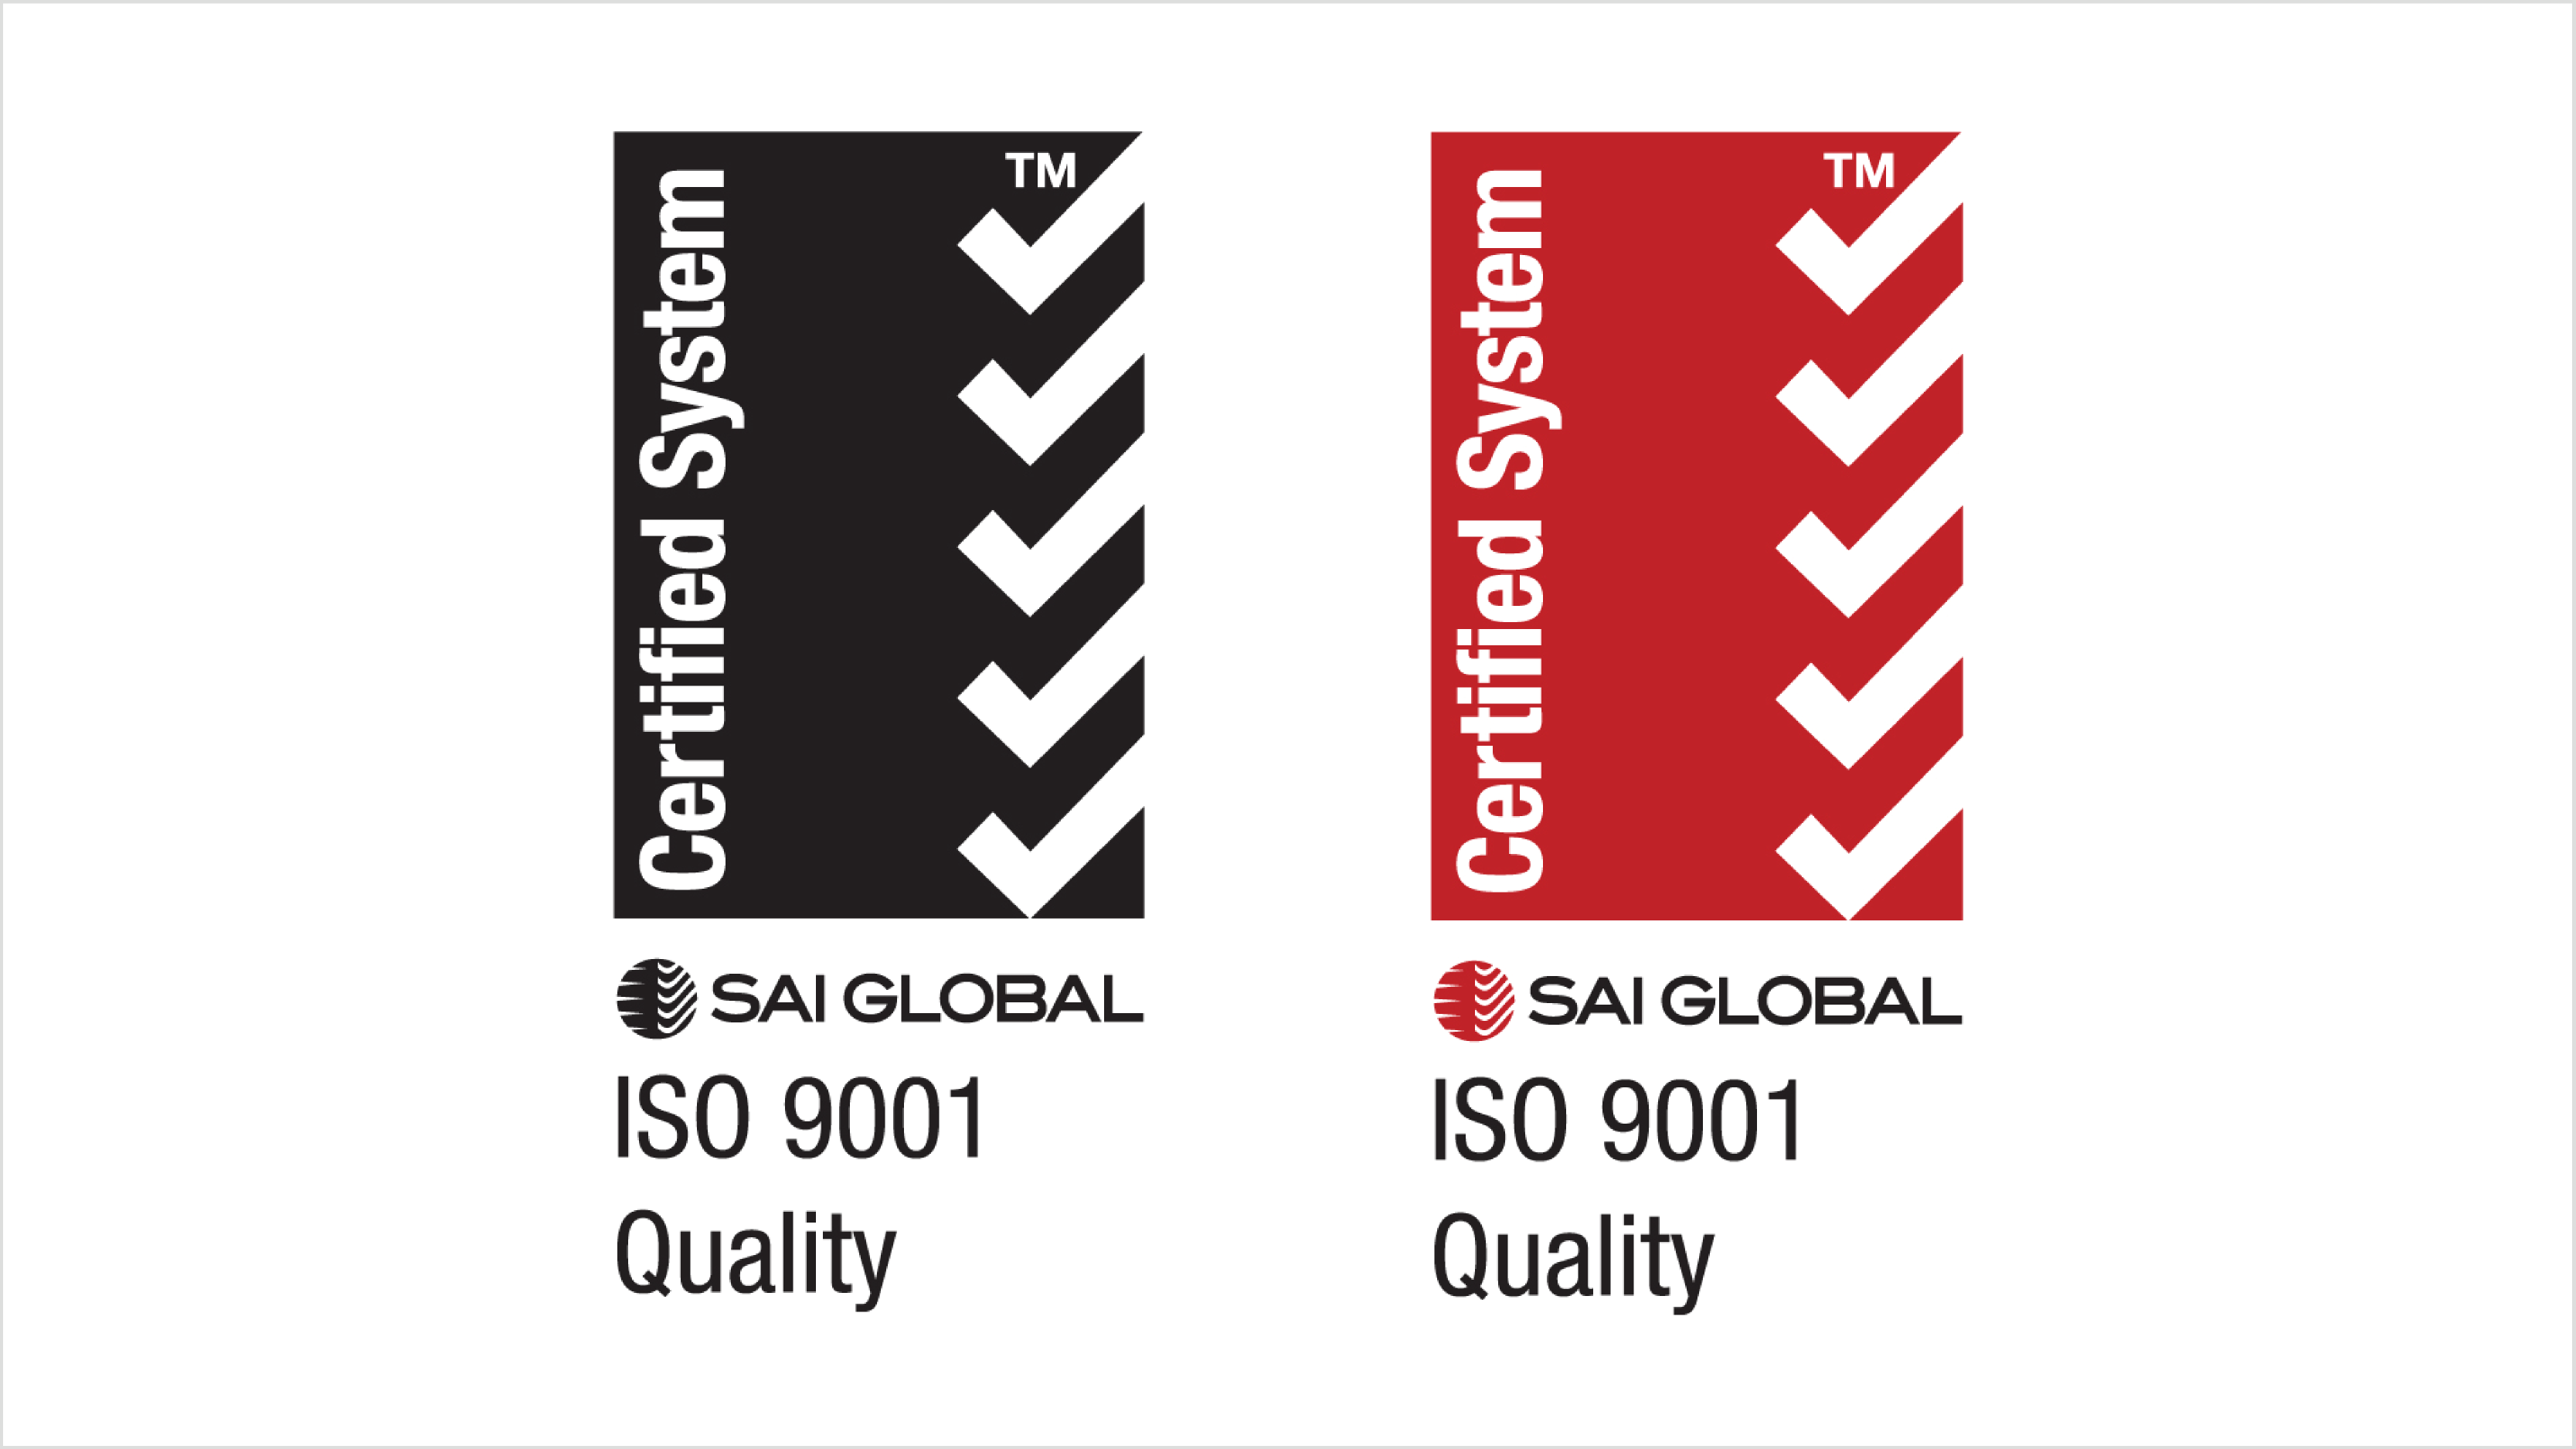 Texcan - Quality Assurance (Body Images) - ISO 9001 SAI GLOBAL LOGO